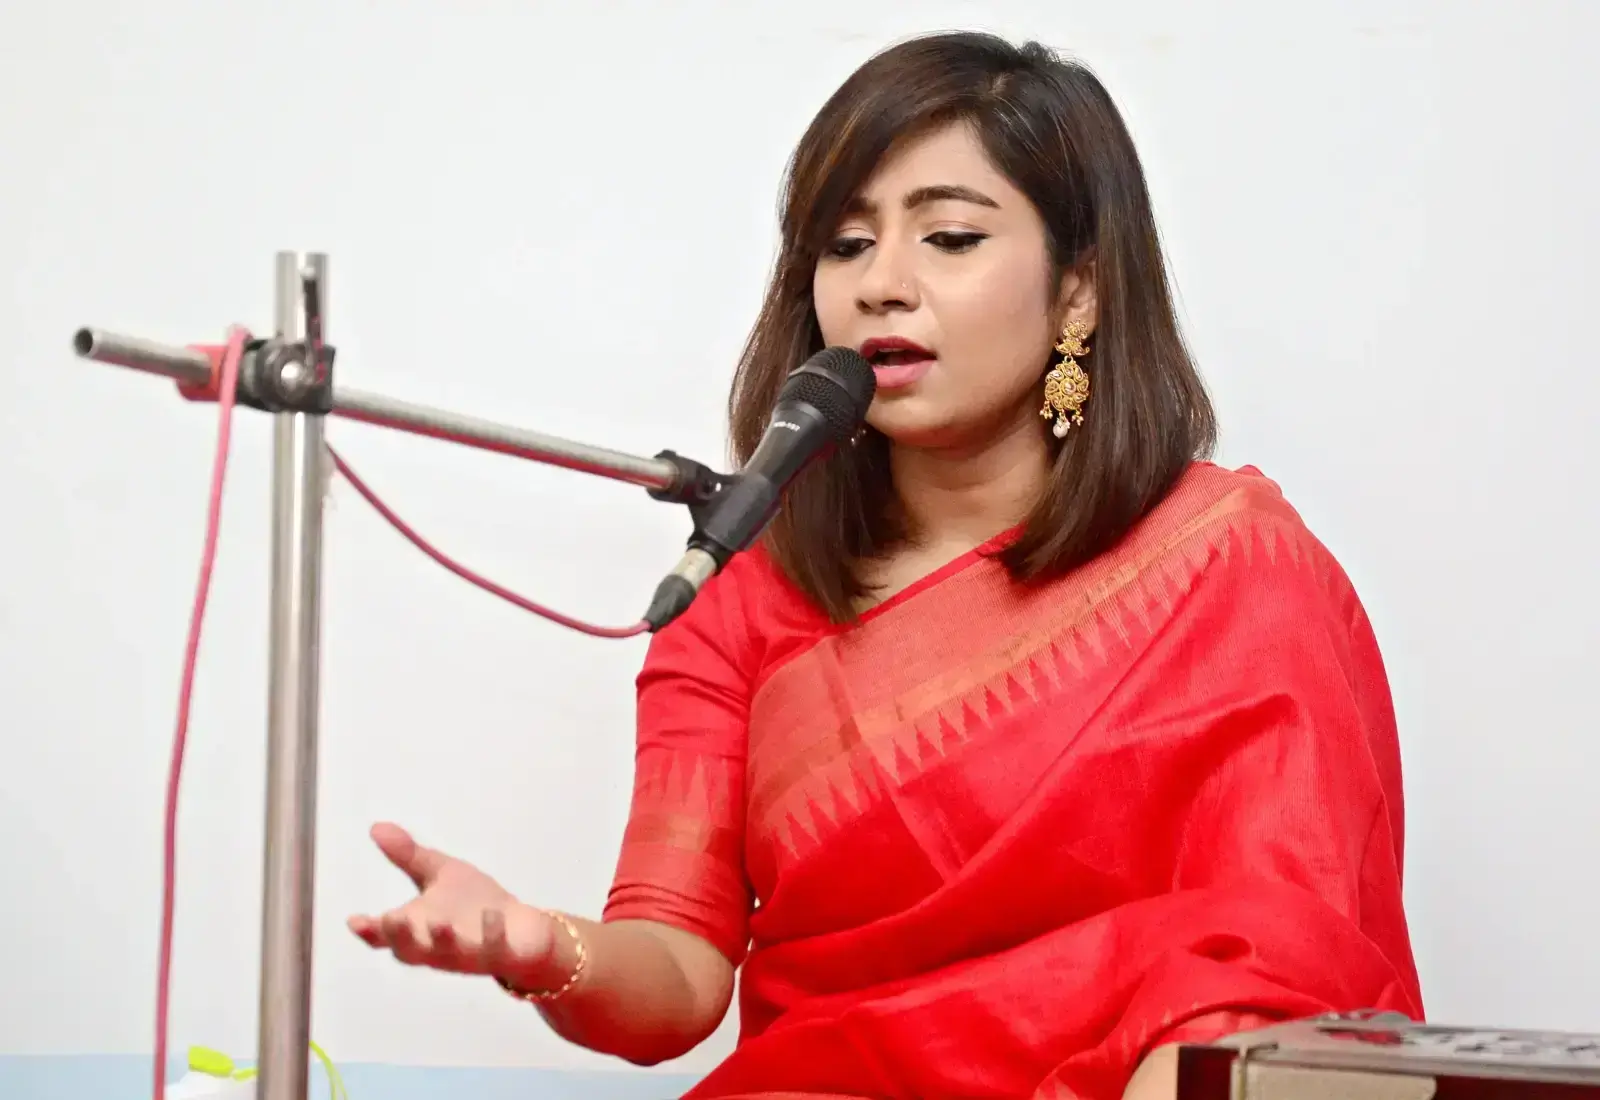 Hindustani Classical Vocal Music For Beginners And Intermediate Level By Angira Kotal